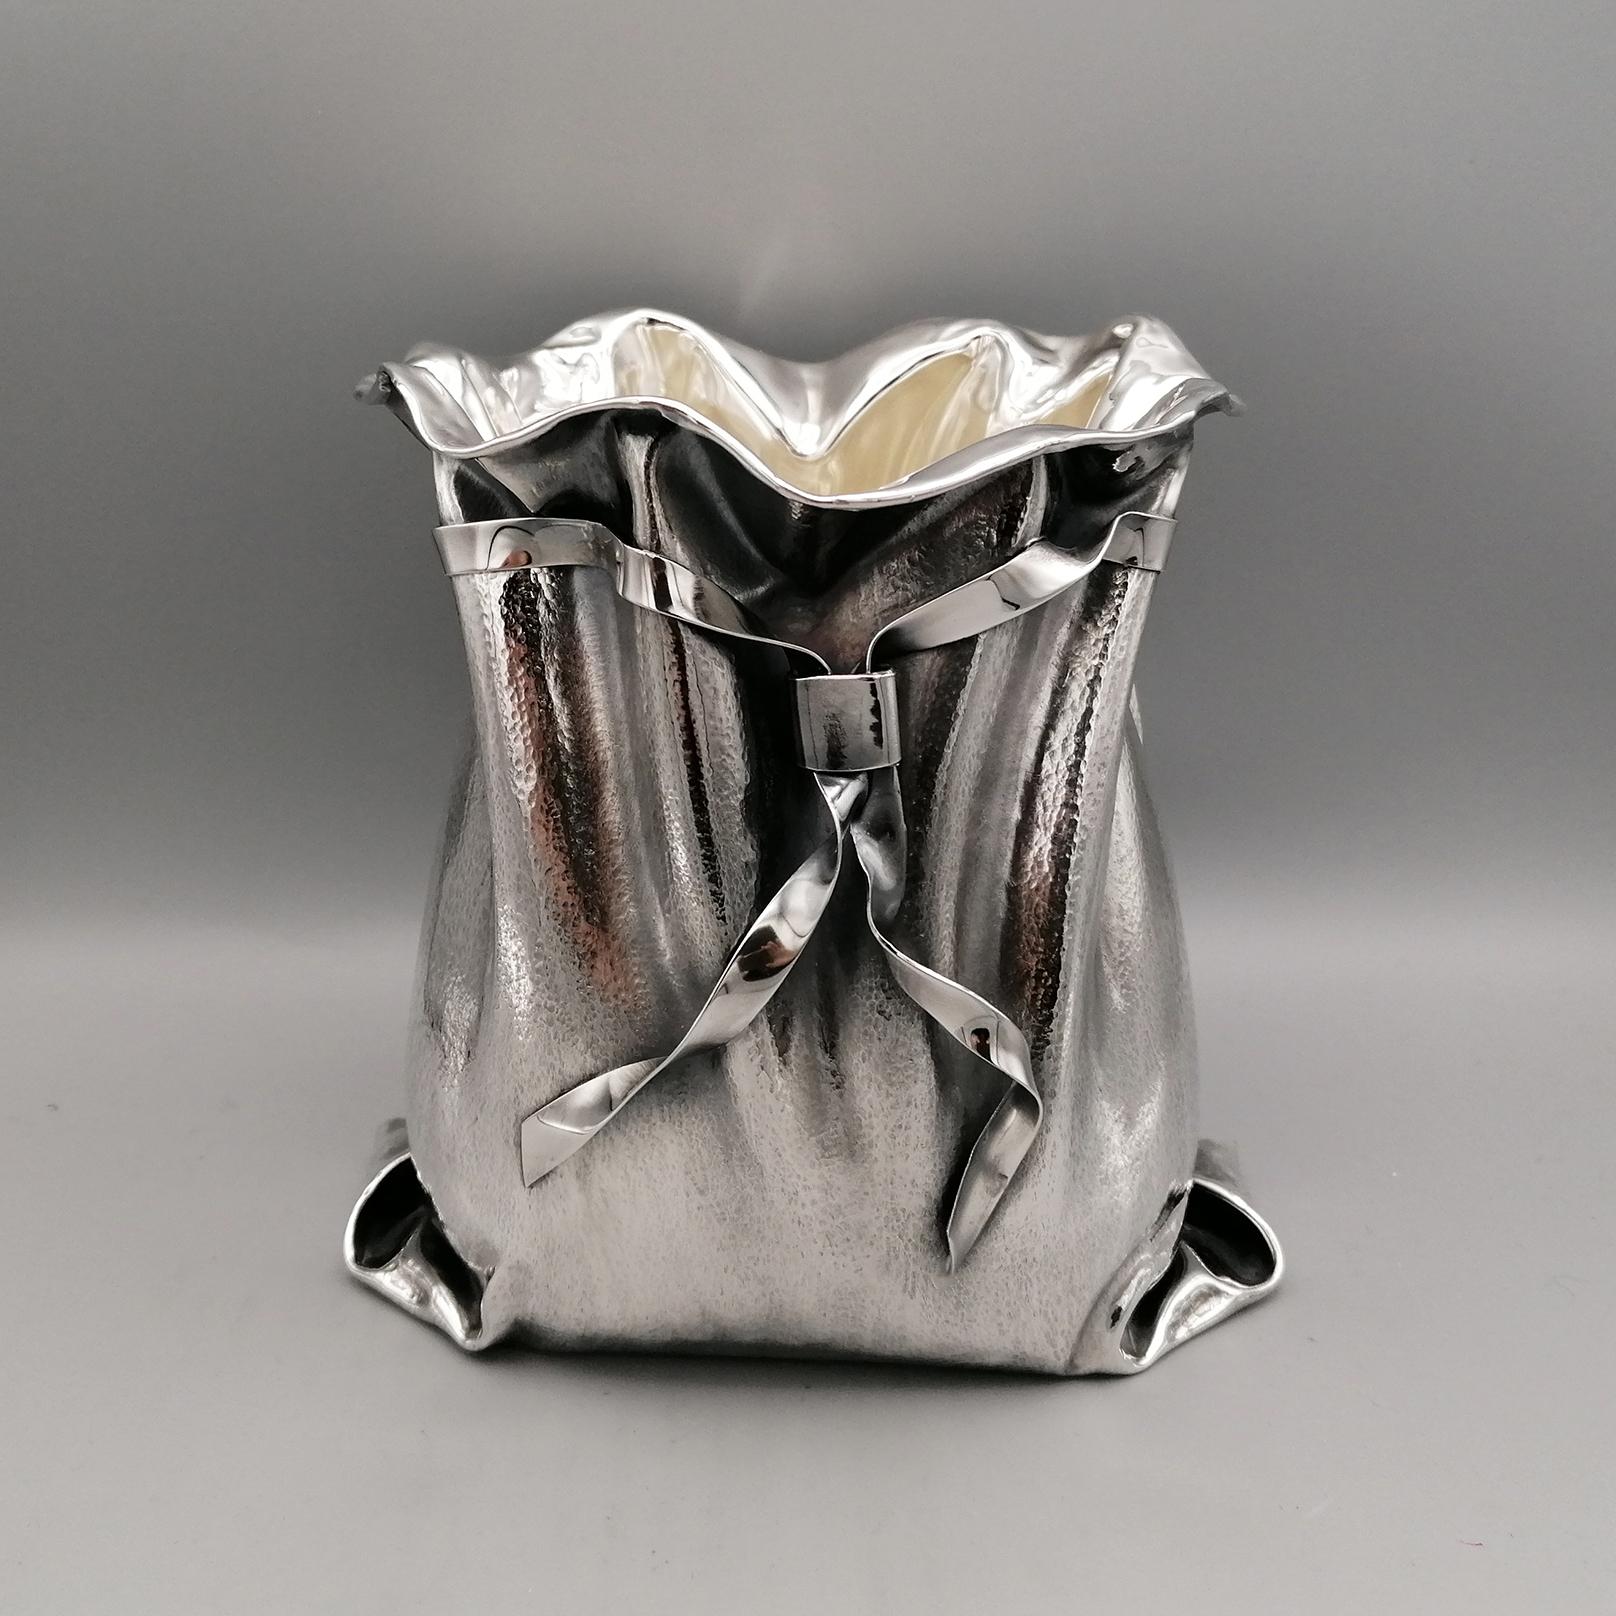 Sack-shaped sterling silver vase or bowl.
The vase was completely handmade starting from the sterling silver plate, skilfully modeled until it took the shape of a sack.
The body was hammered and then finely knurled only on the outside. Then